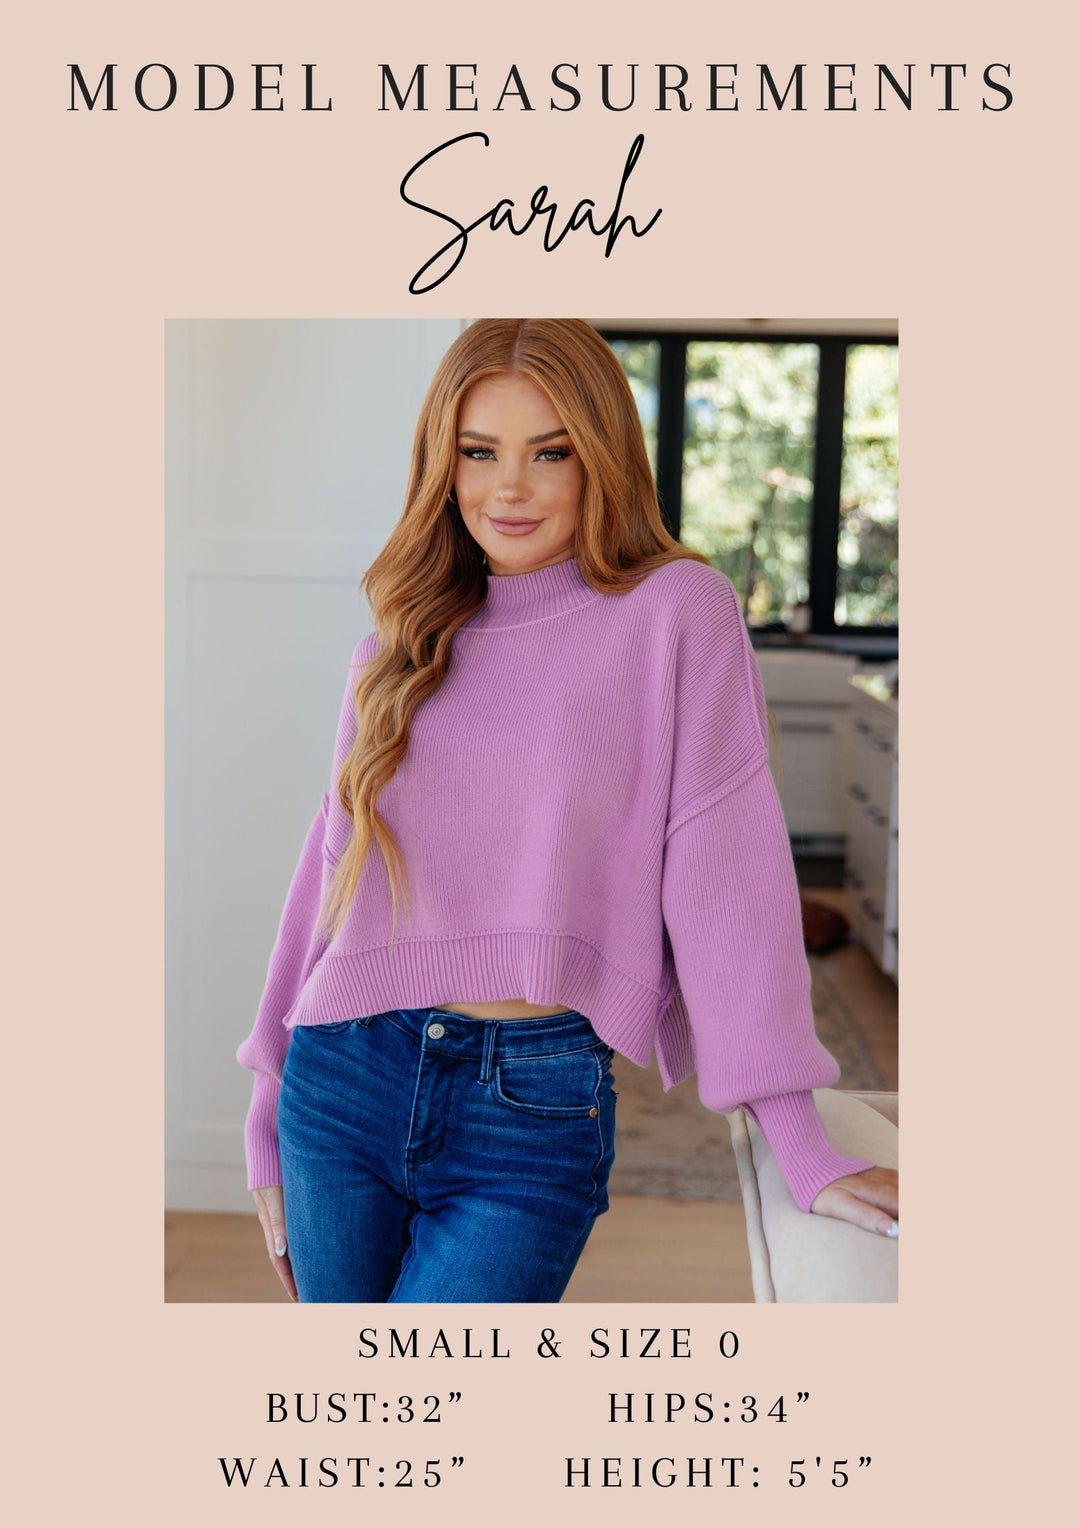 Back to Life V-Neck Sweater in Pink-Sweaters/Sweatshirts-Inspired by Justeen-Women's Clothing Boutique in Chicago, Illinois